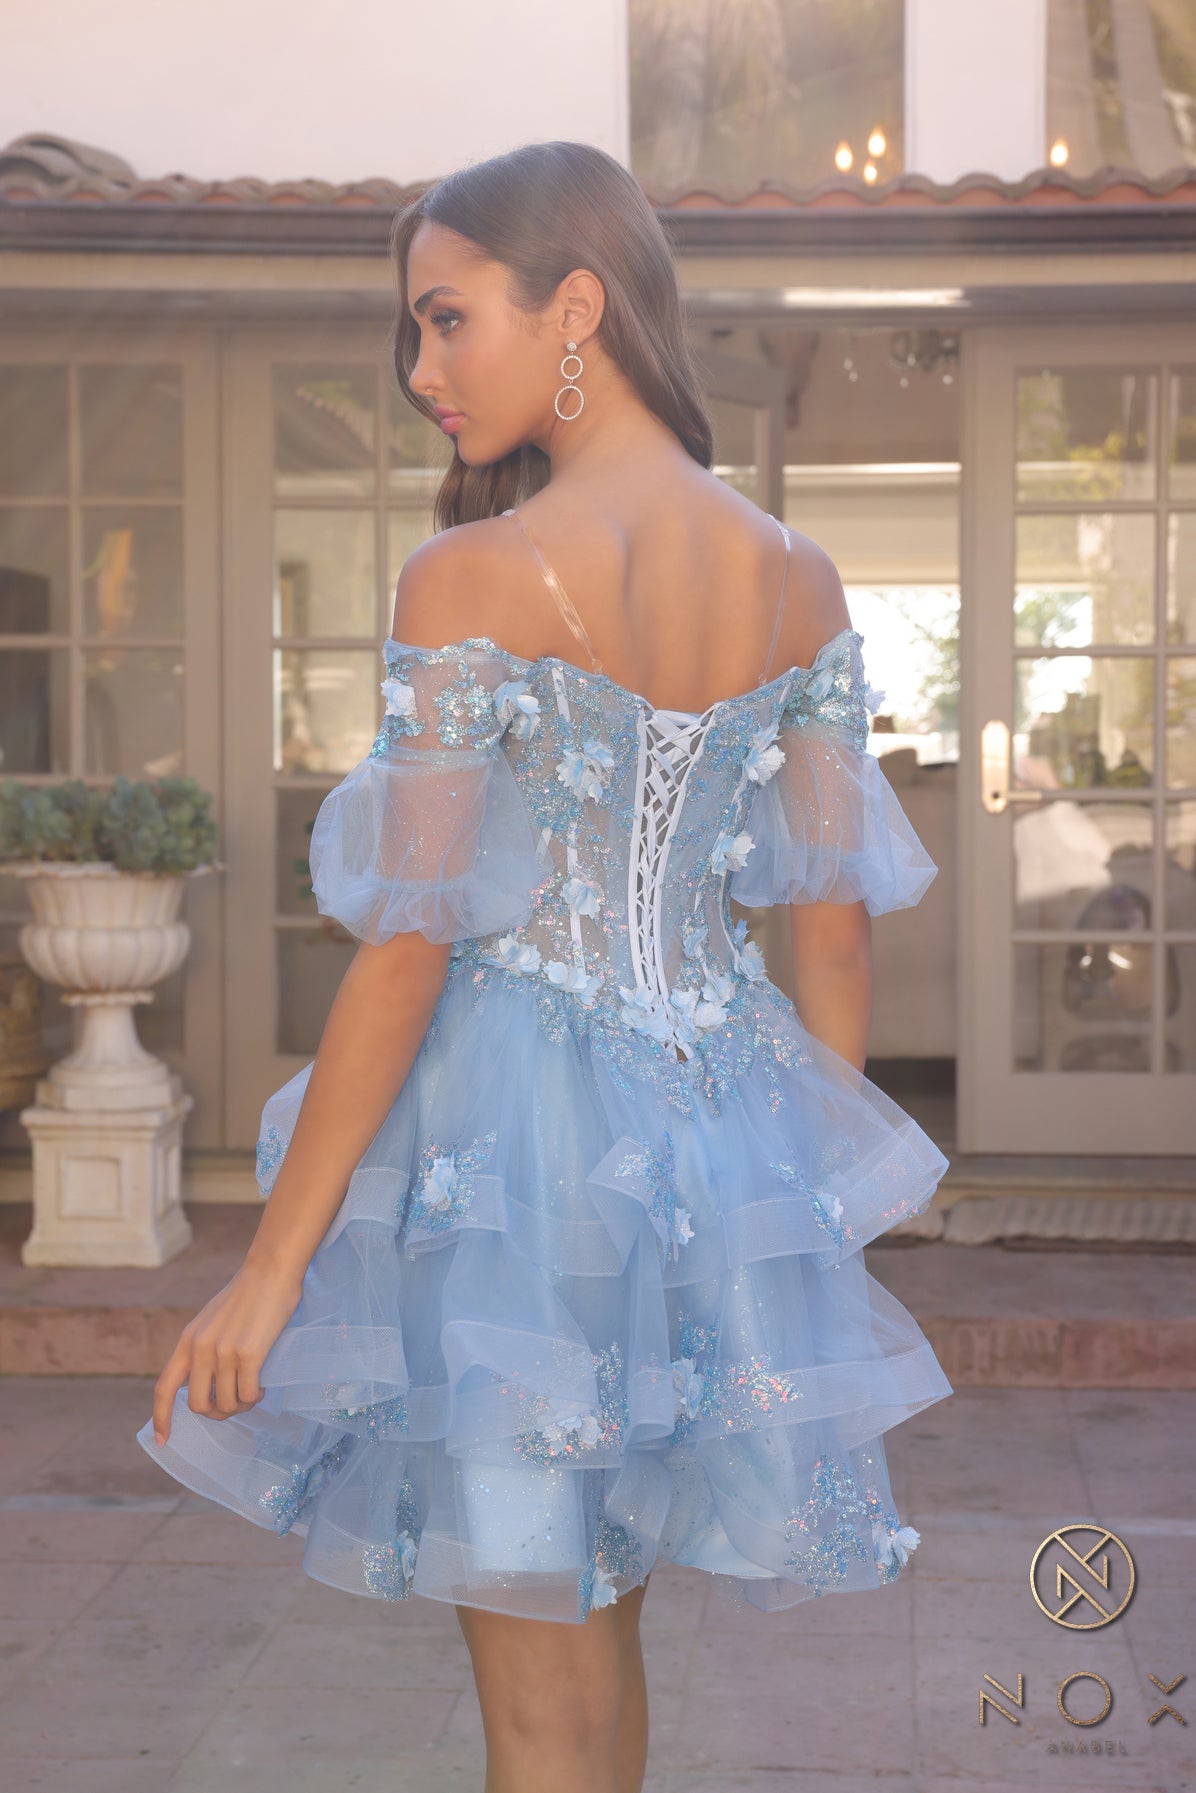 Prom Dresses Glittered Tulle Prom Ballgown Franch Blue